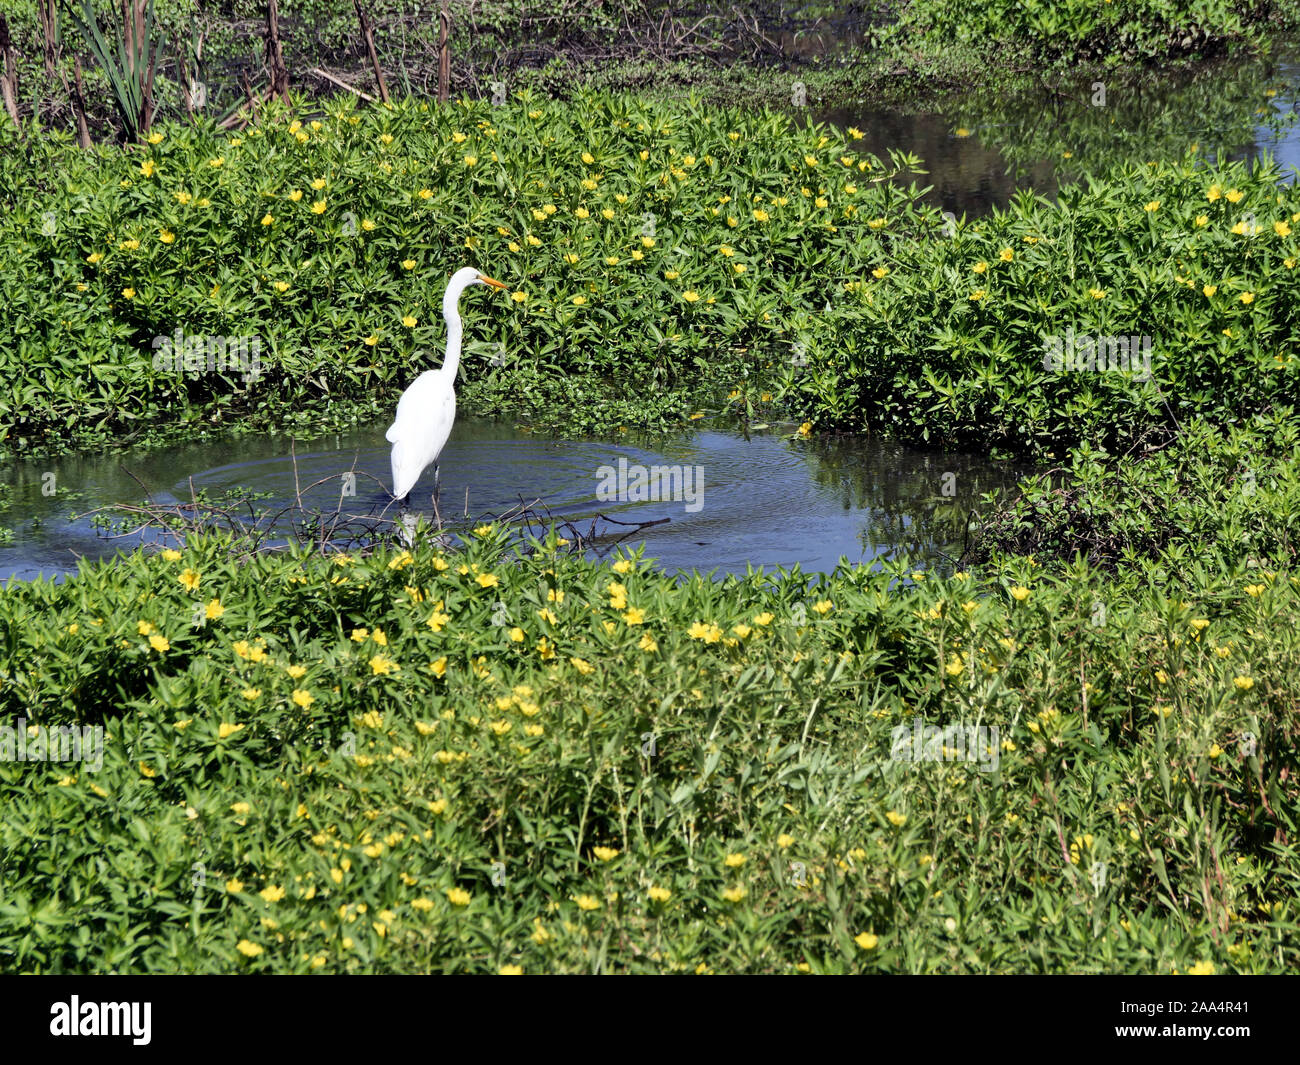 Crane stands in the Consumnes Nature Preserve in the Sacramento River delta. Volunteers work to preserve nature in what once was farmland and return it to nature. Stock Photo